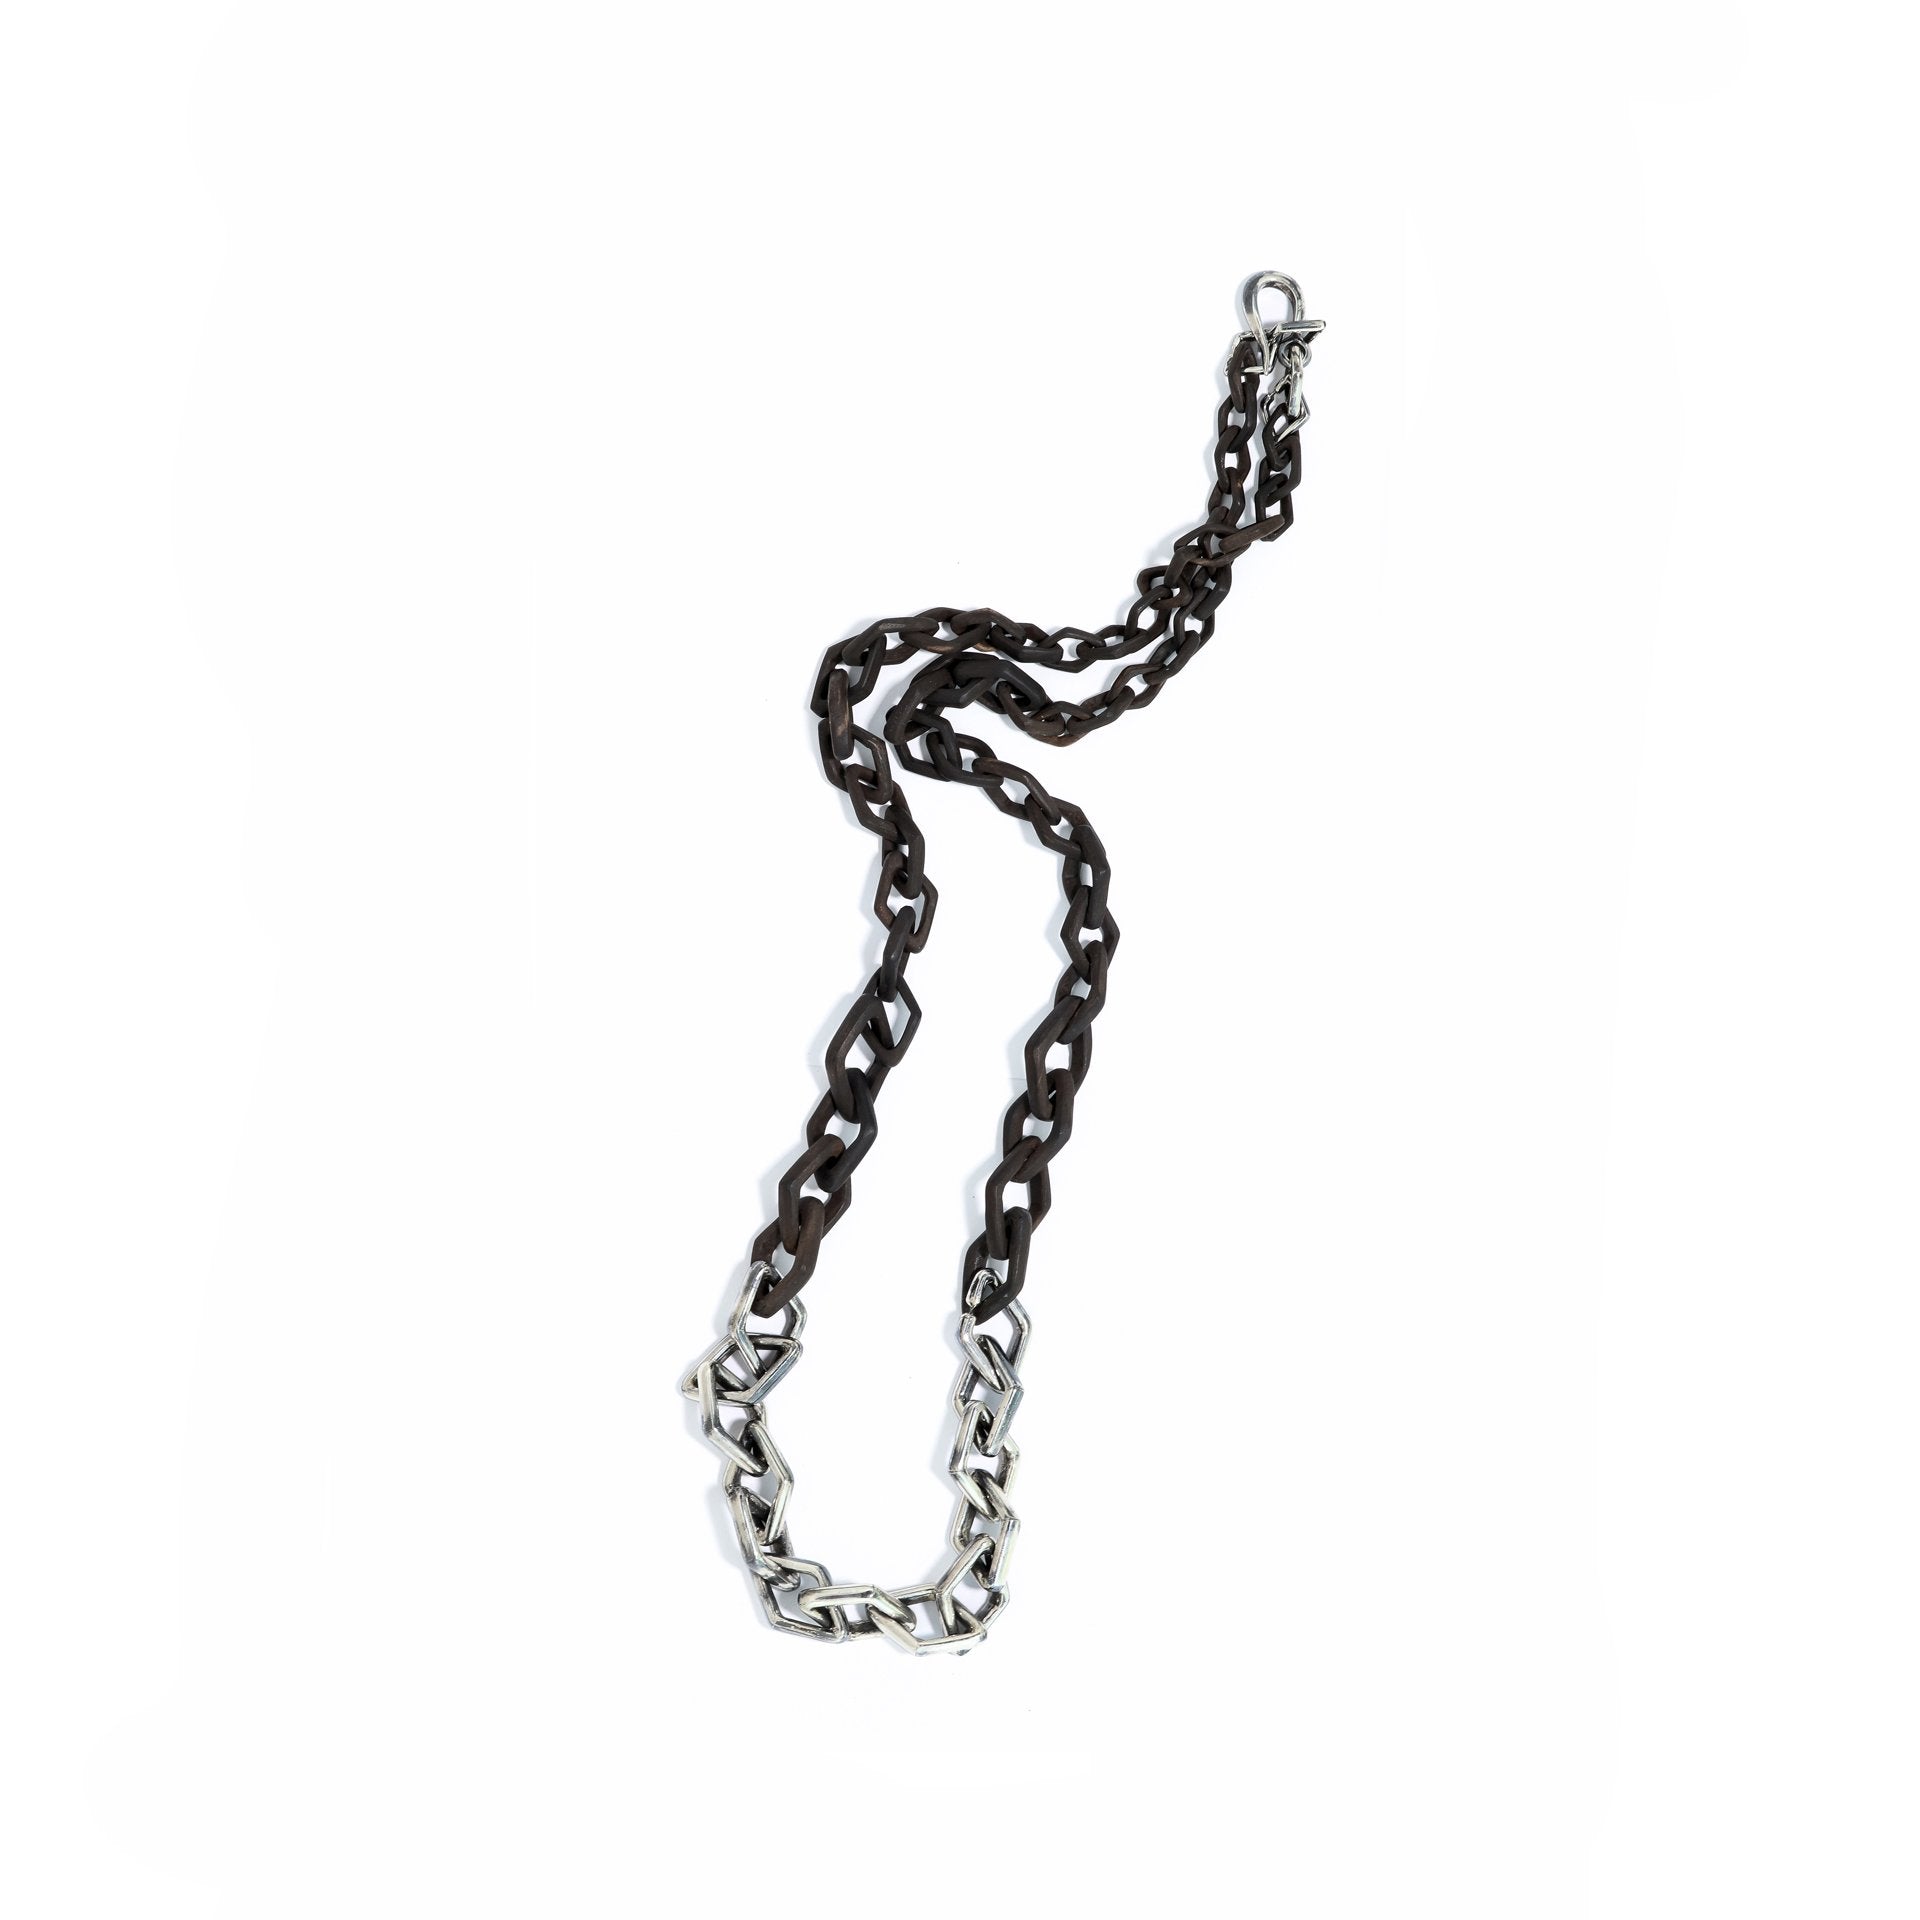 Sphere Link Chain Necklace XL in Sterling Silver